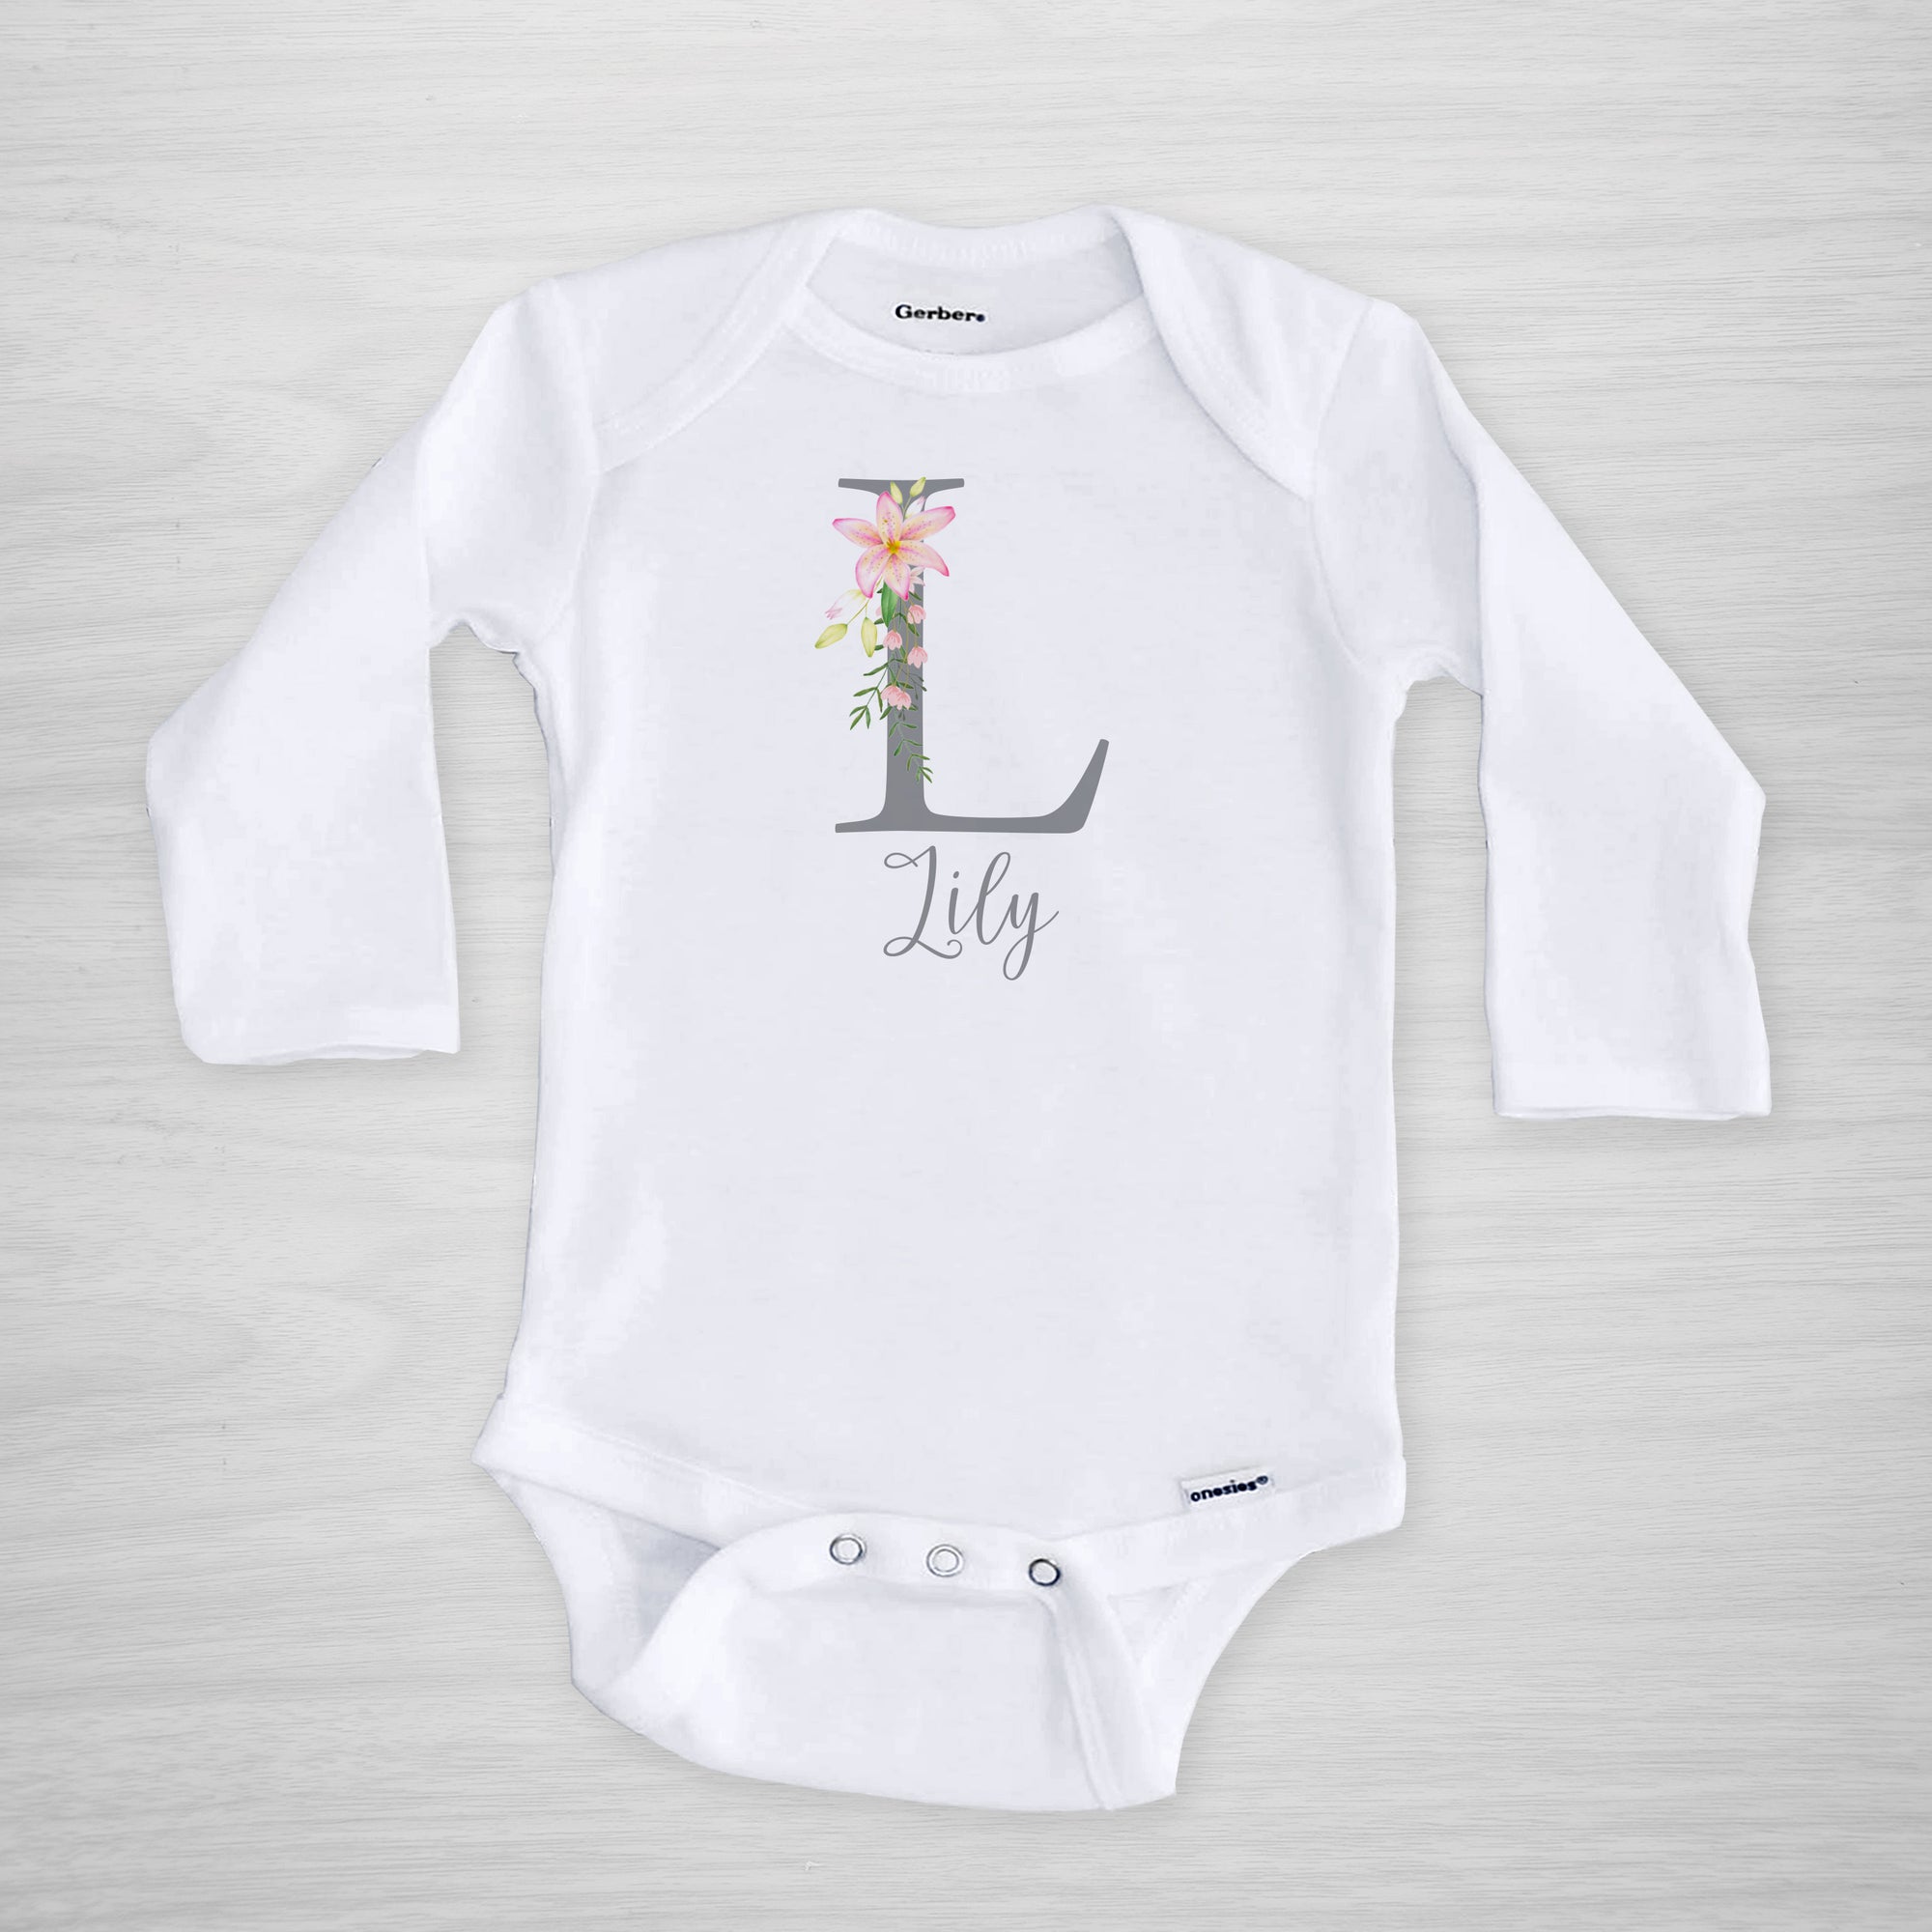 Lily Initial Onesie, Personalized with name, long sleeved